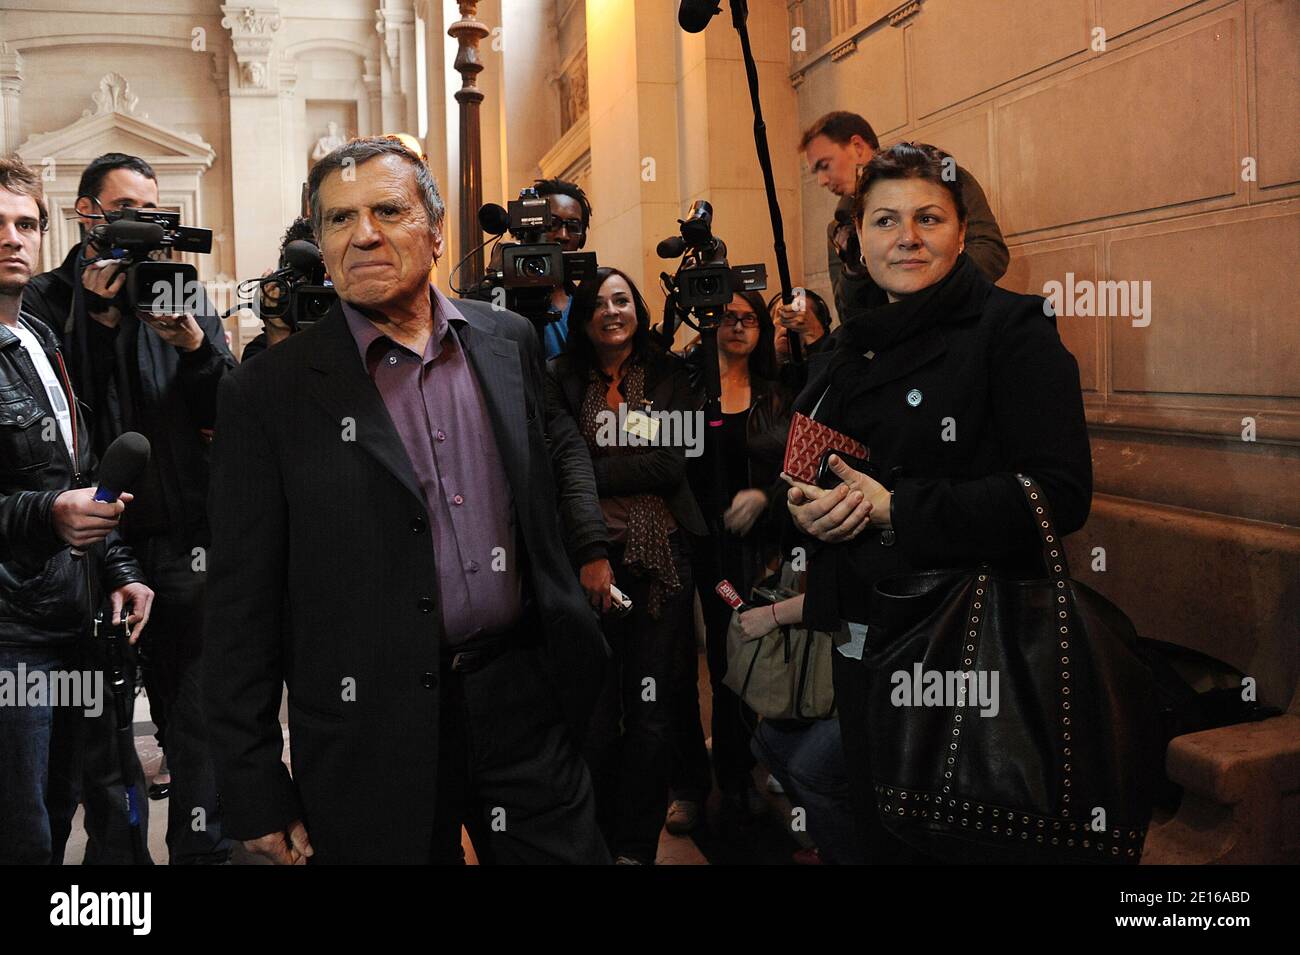 Jean-Hugues Colonna, father of Yvan Colonna and Christine Colonna, sisiter of Yvan Colonna arrive at Paris court hall in Paris, France on May 2, 2011 for the opening of Yvan Colonna's appeal trial for the murder in 1998 of Claude Erignac, France's top state official on the Mediterranean island of Corsica. Photo by Giancarlo Gorassini/ABACAPRESS.COM Stock Photo